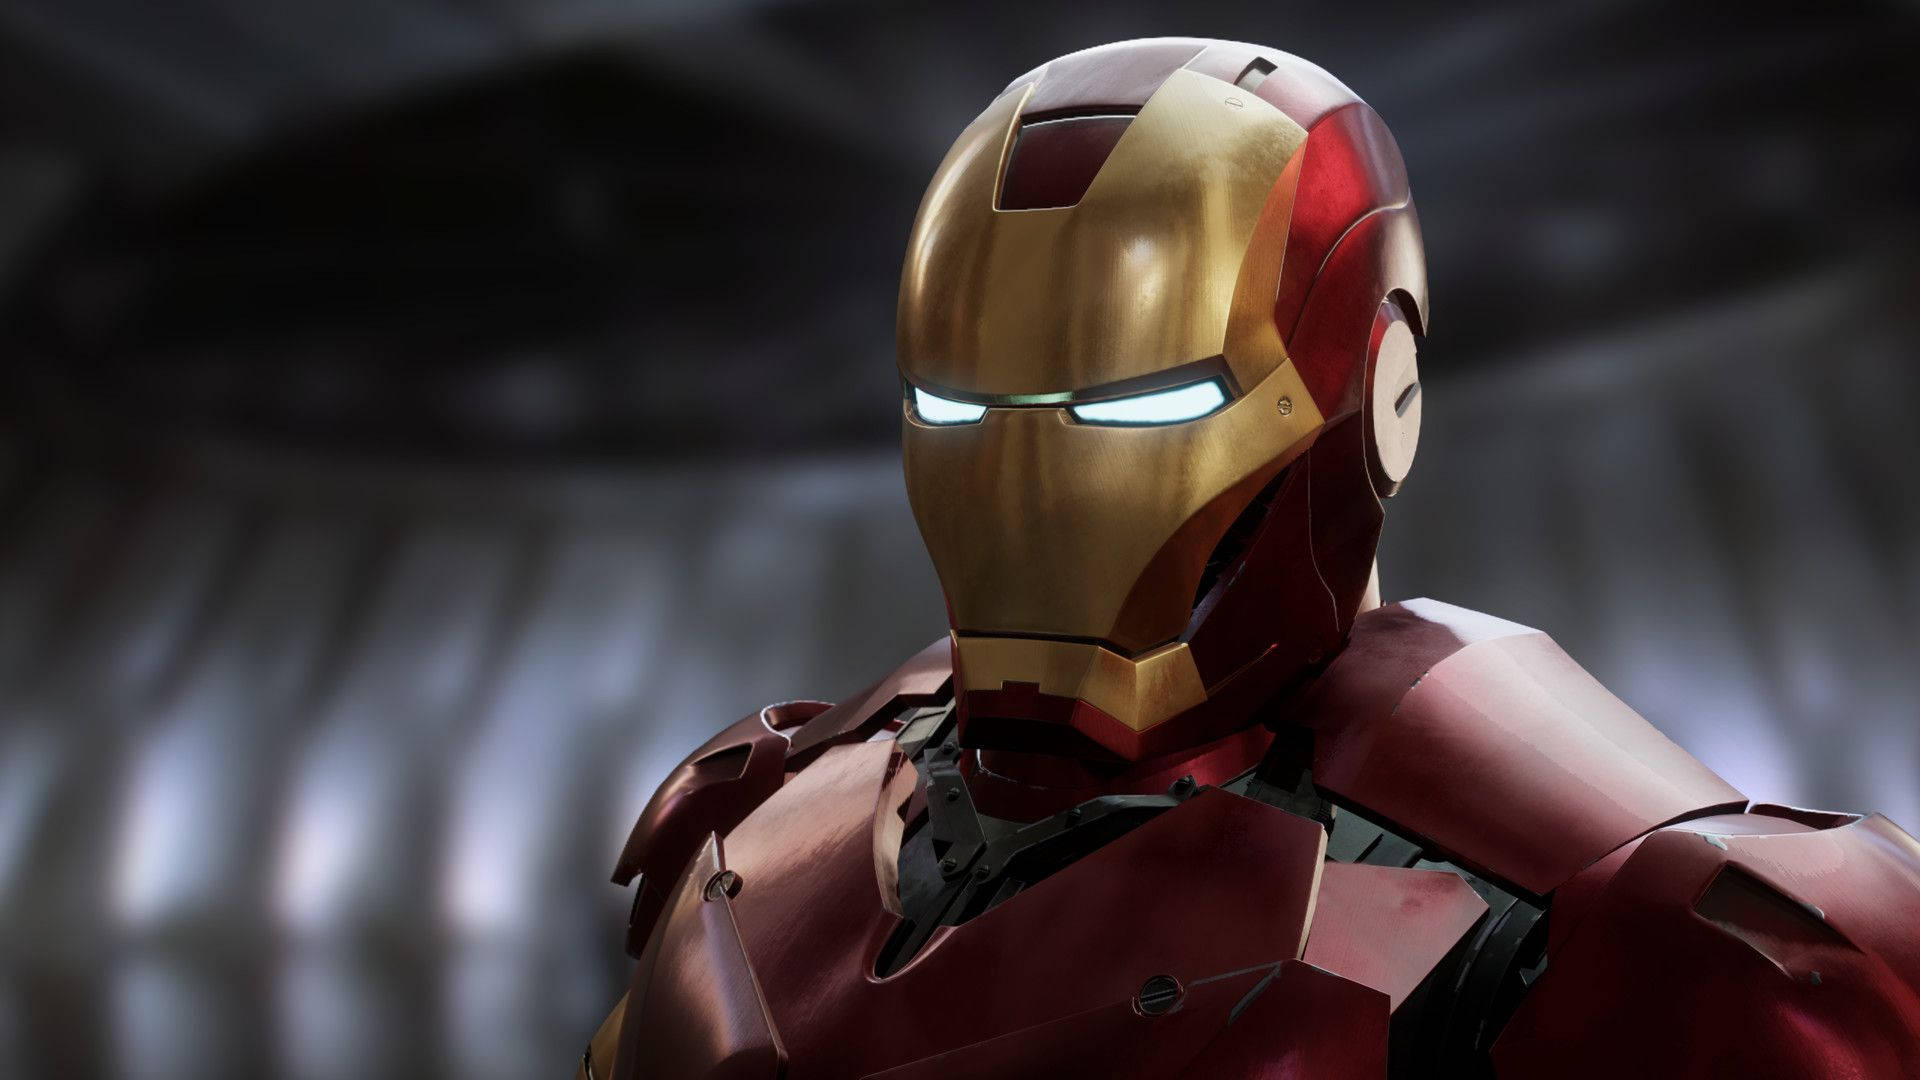 Iron Man Mark 3 - Ready for Action Wallpaper